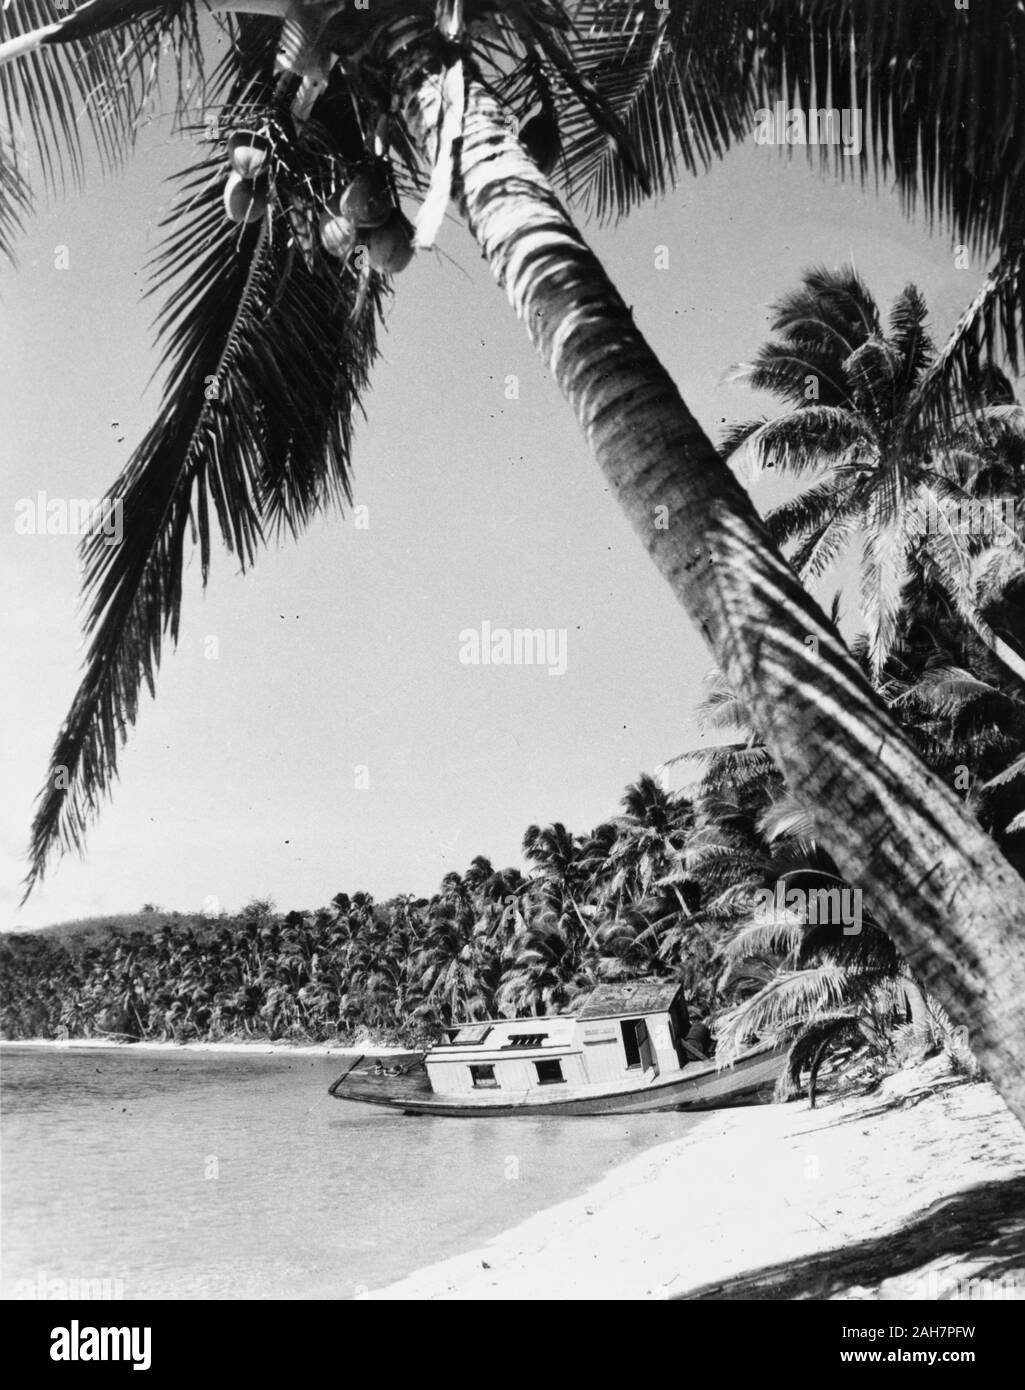 Fiji, A beached boat, FijiA small motor boat lies stricken on a sandy beach, after having its “bottom ripped out on a hidden reef'. Caption reads: This boat is unlikely to sail again, for she has just had her bottom ripped out on a hidden reef, 1965. 2005/010/1/14/30. Stock Photo